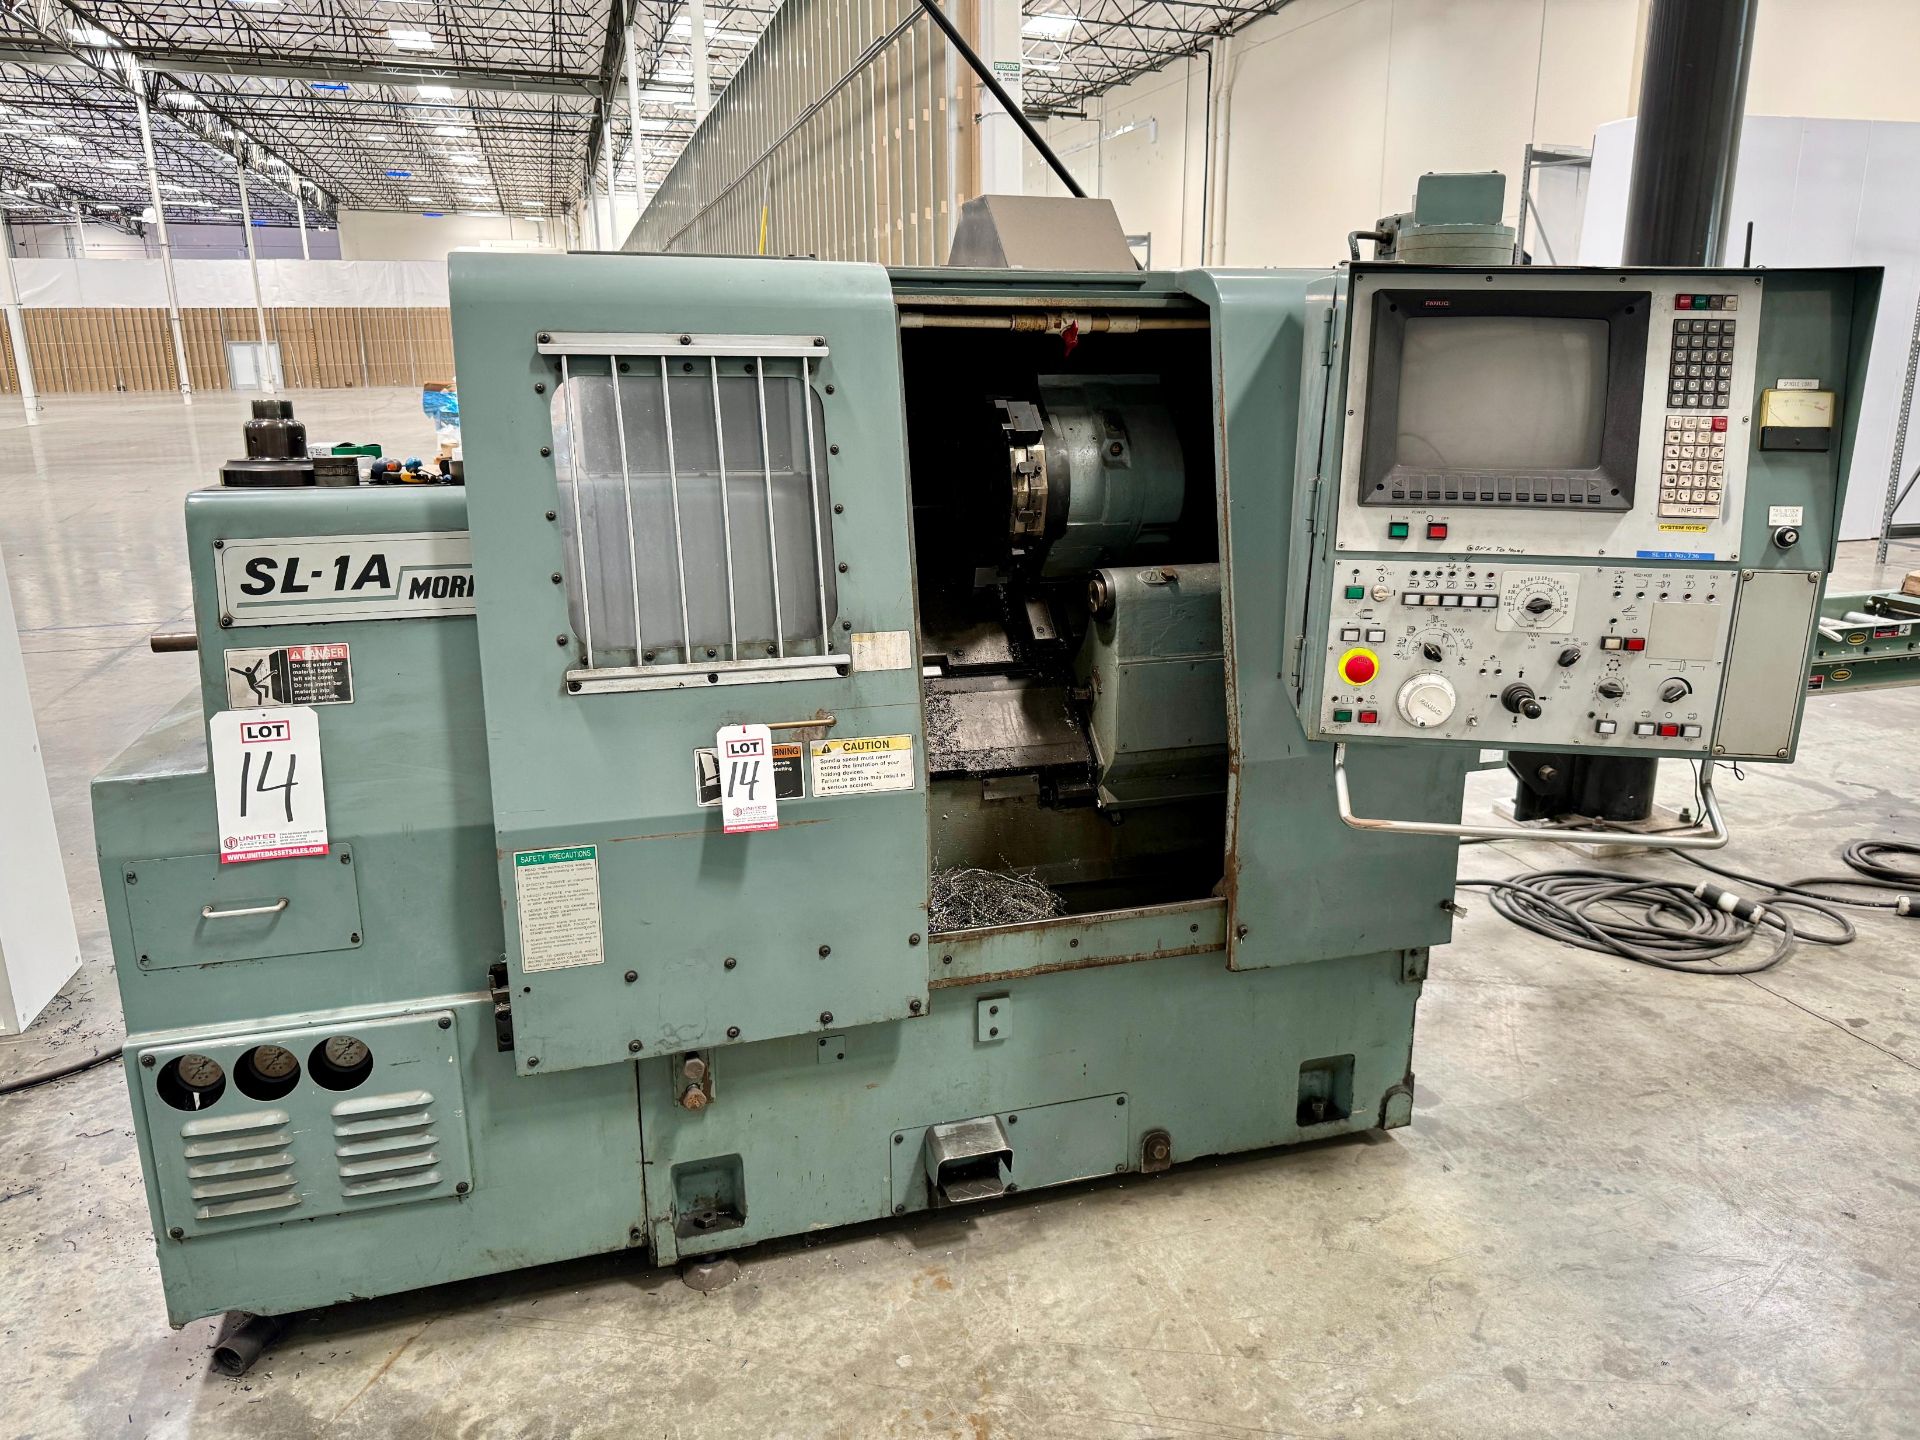 MORI SEIKI SL-1A TURNING CENTER, FANUC SYSTEM 10TE-F CONTROL, TAILSTOCK, CHIP CONVEYOR, S/N 736 - Image 2 of 17